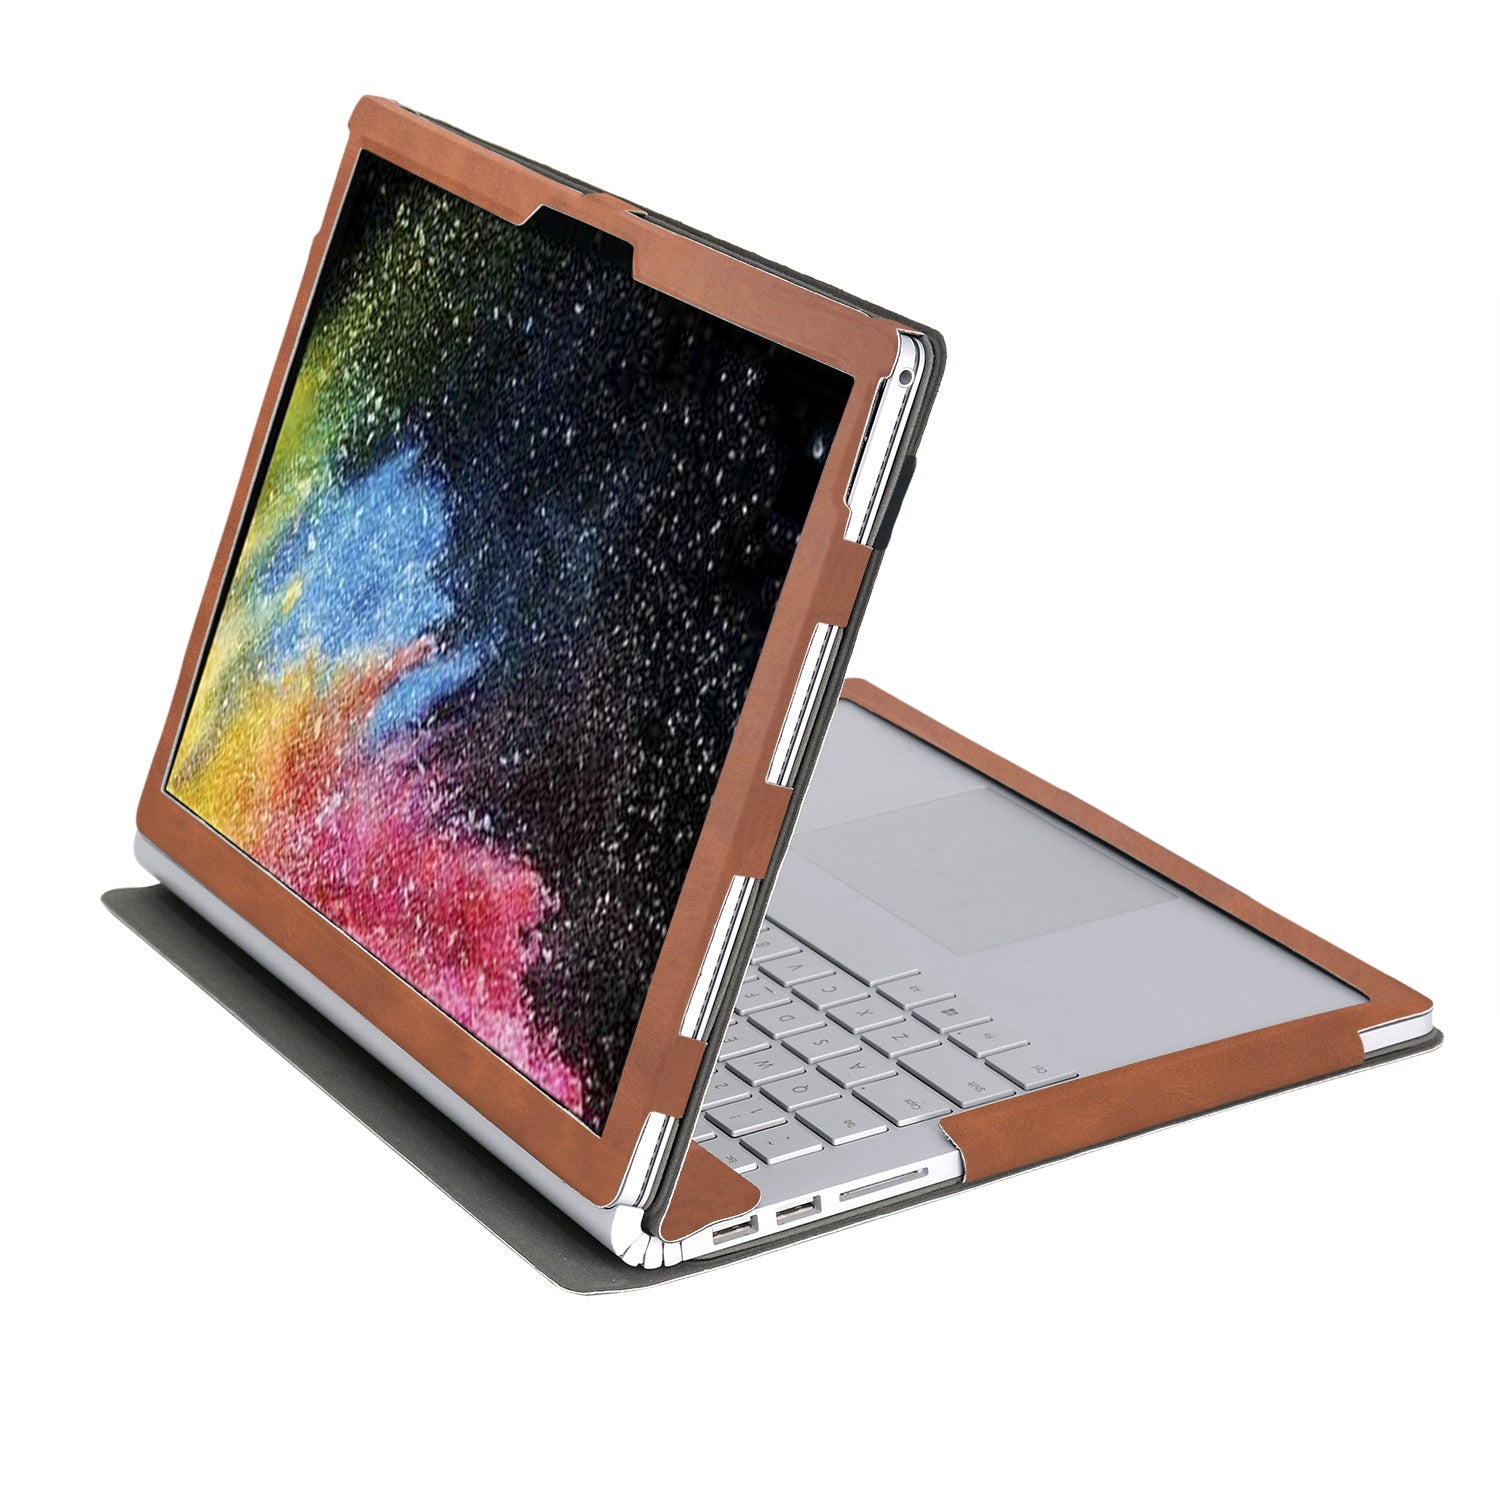 Surface Book Detachable Cover Case, Protective Cover Case for 